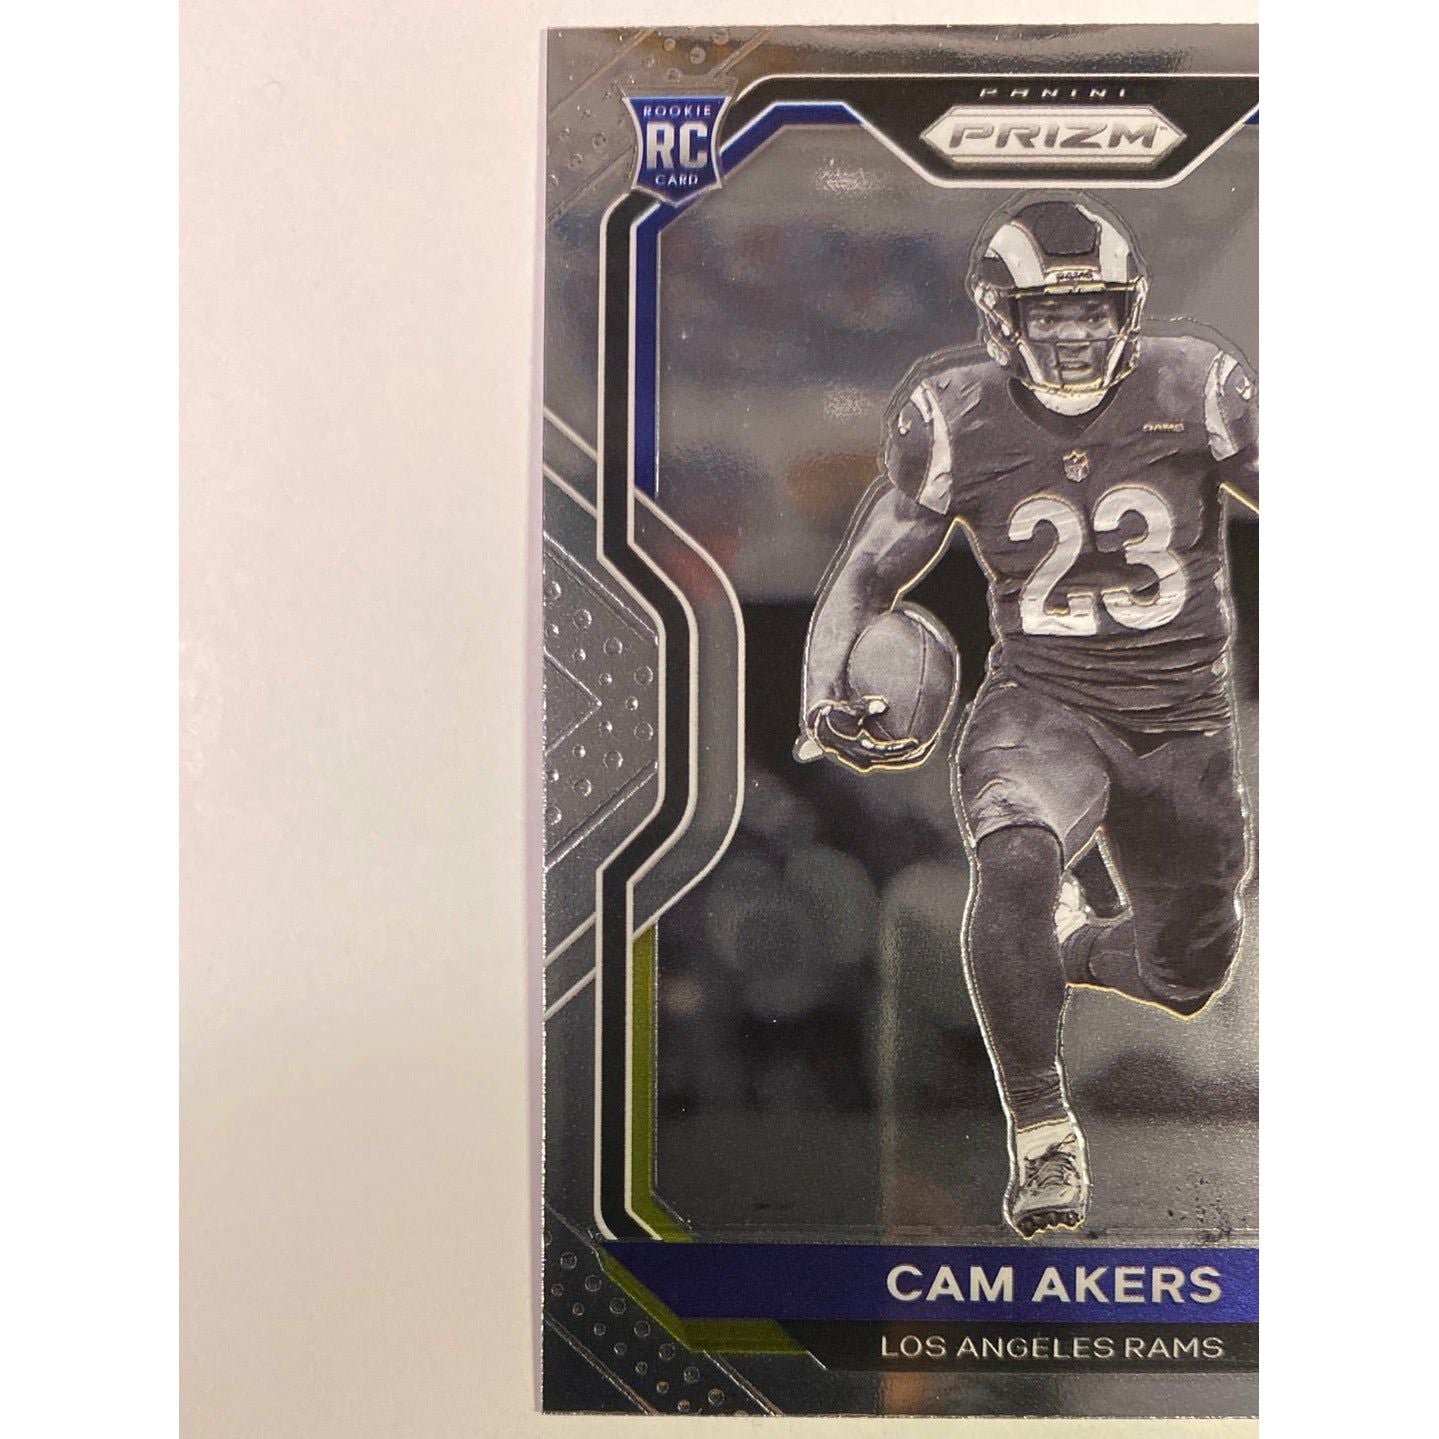  2020 Panini Prizm Cam Akers Negative Parallel RC  Local Legends Cards & Collectibles